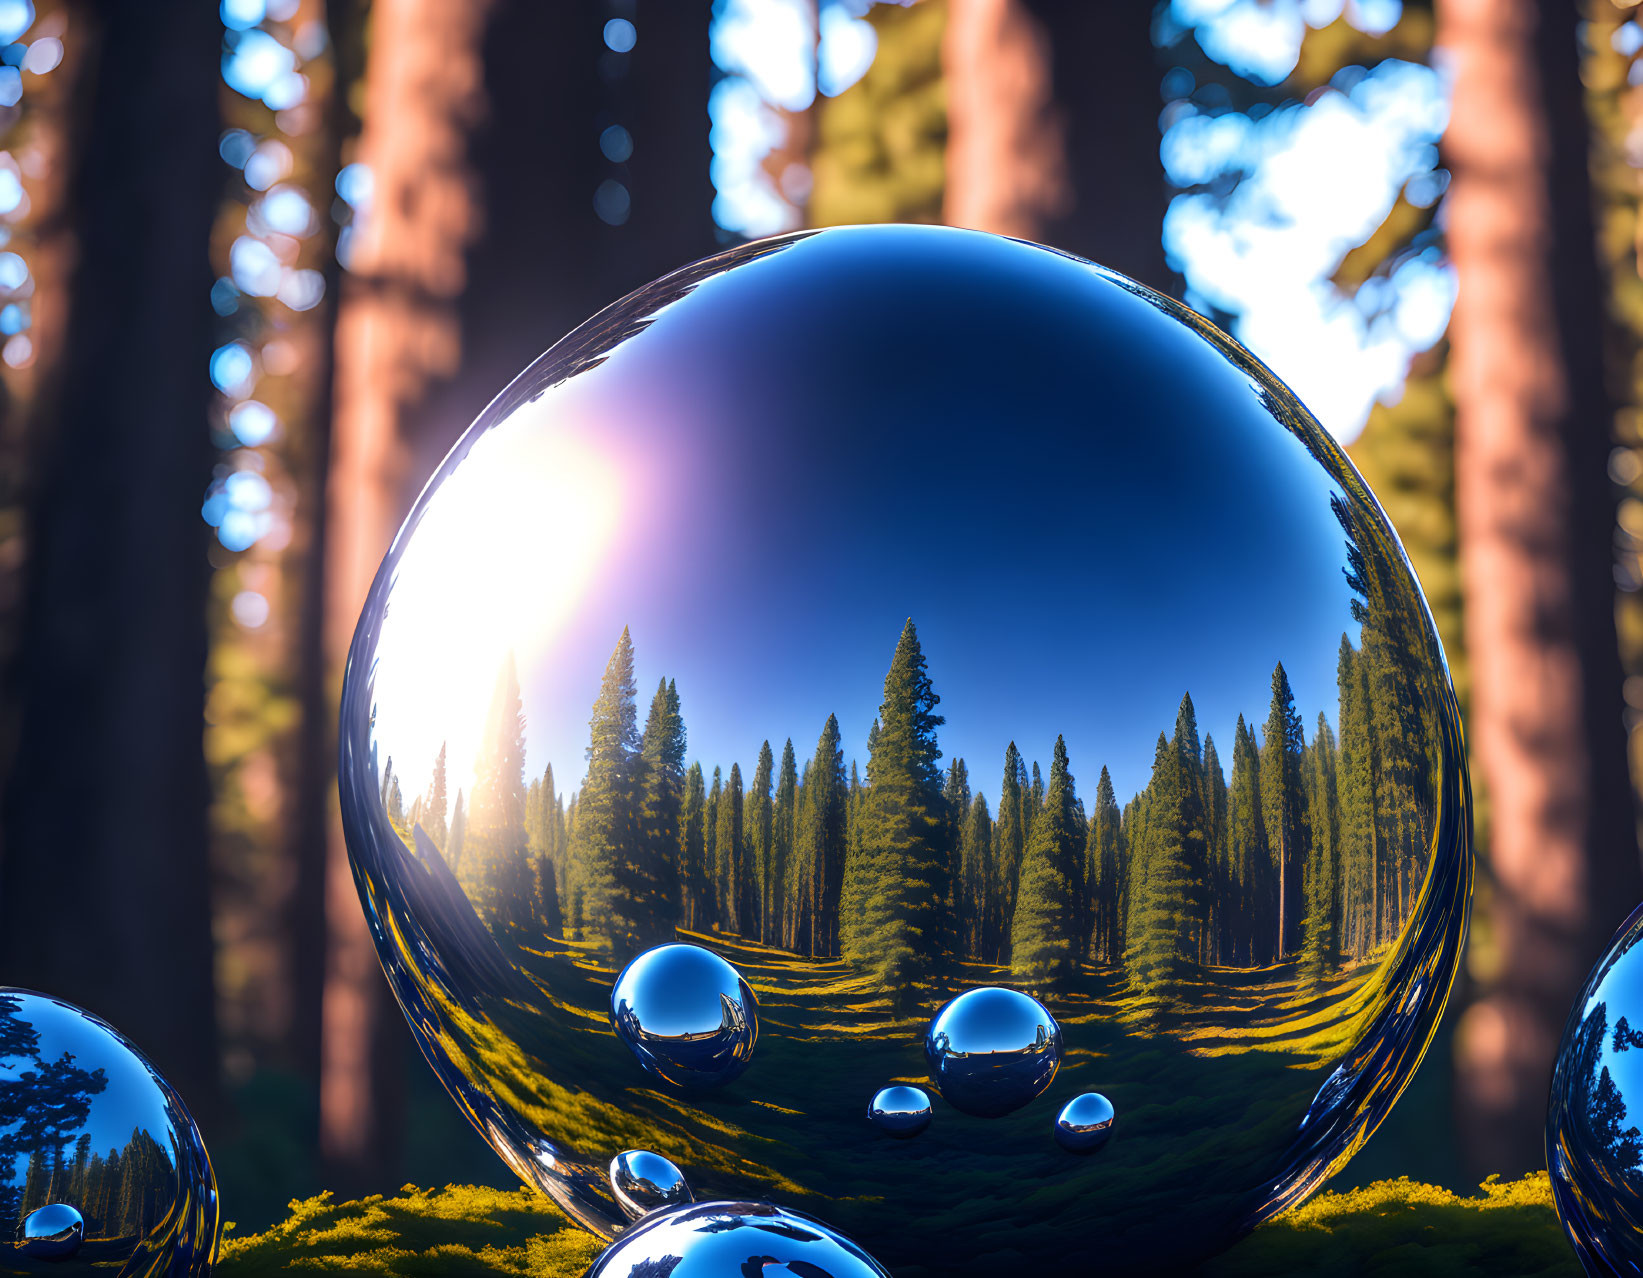 Reflective sphere distorts sunlit forest with scattered smaller spheres